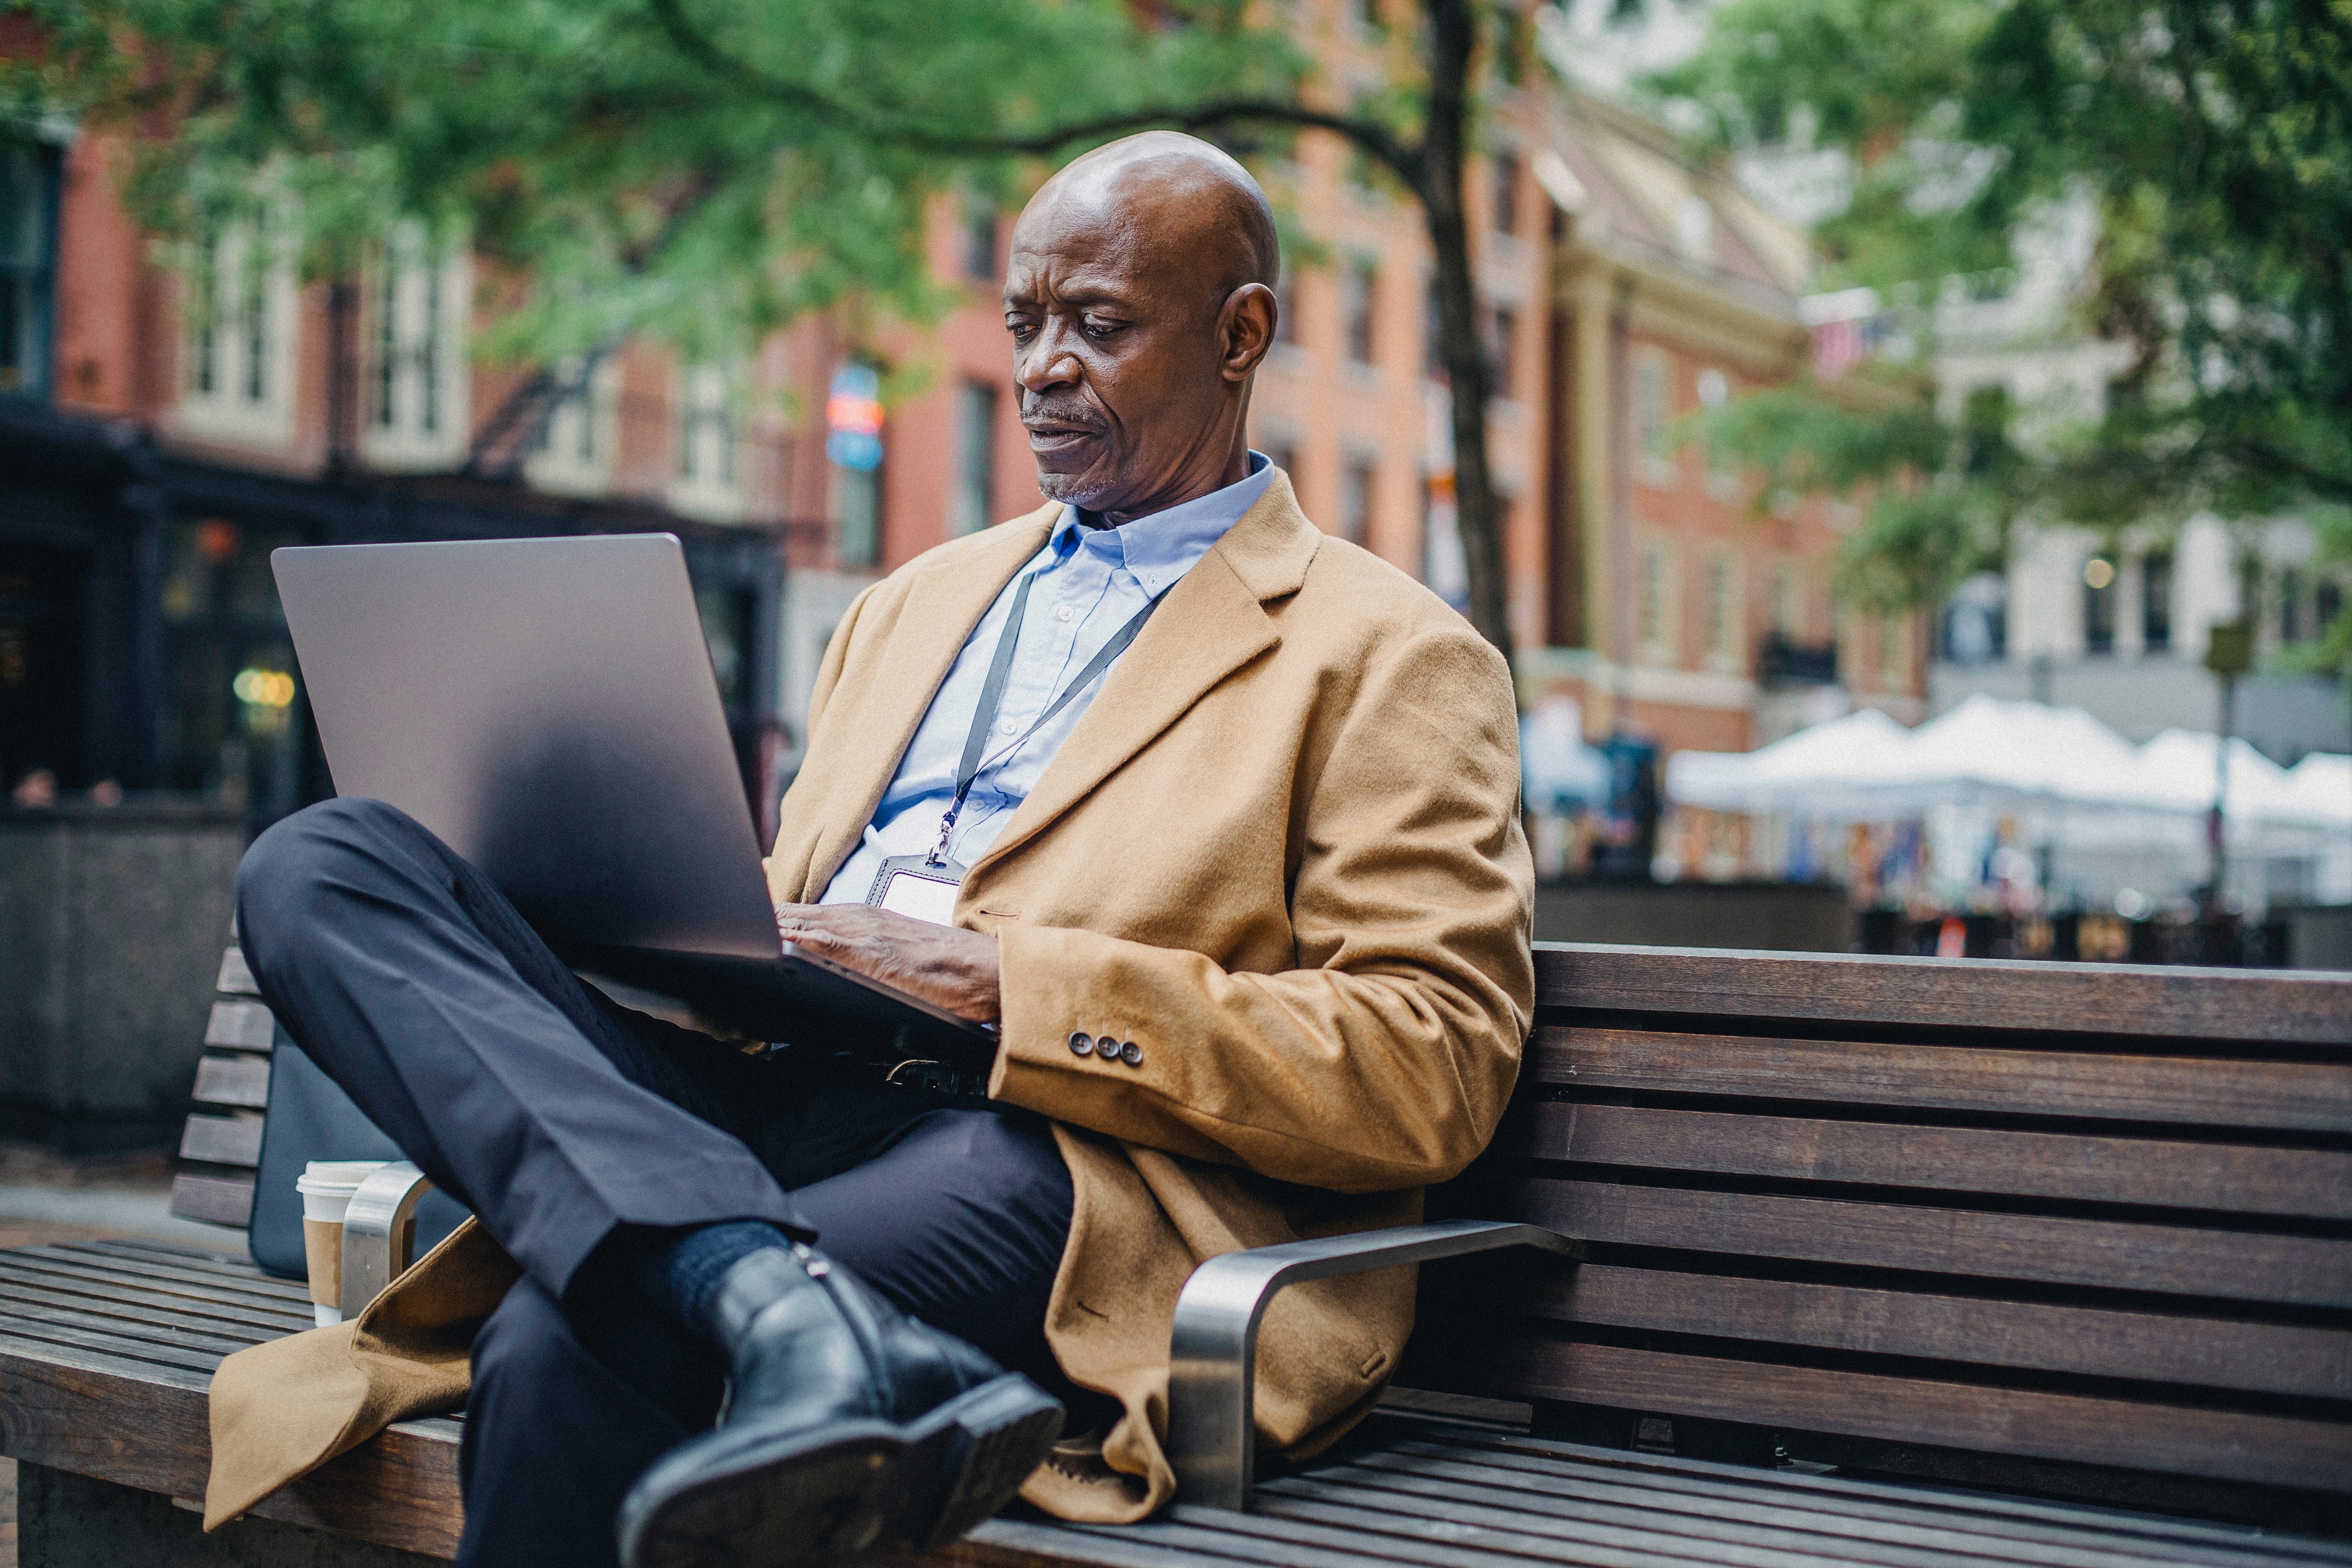 Man Sitting On Park Bench with Laptop